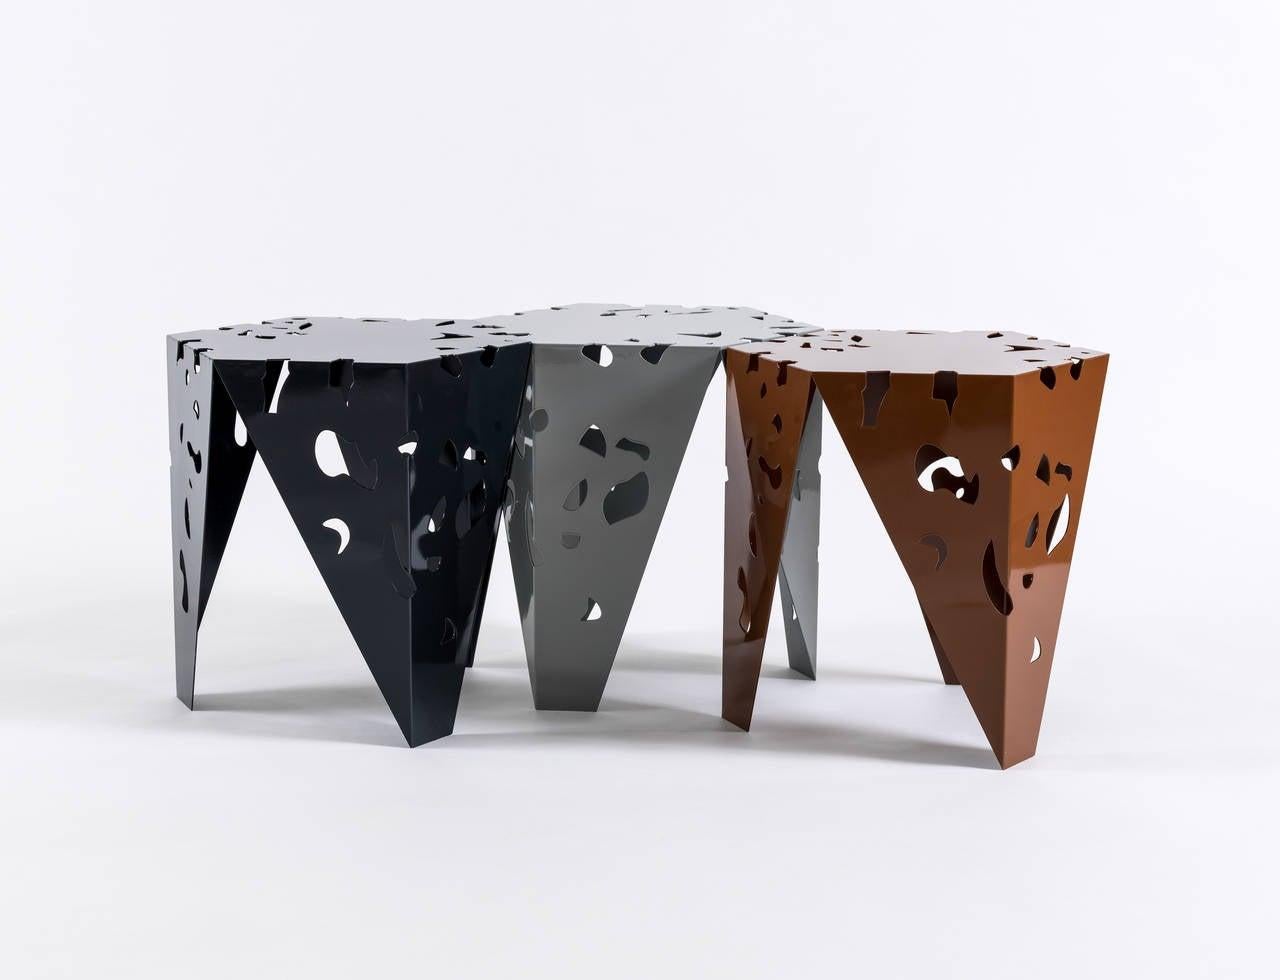 The FDA stool is made of stainless steel and comes with six colors: white, black, mirror, copper, grey, and gold.